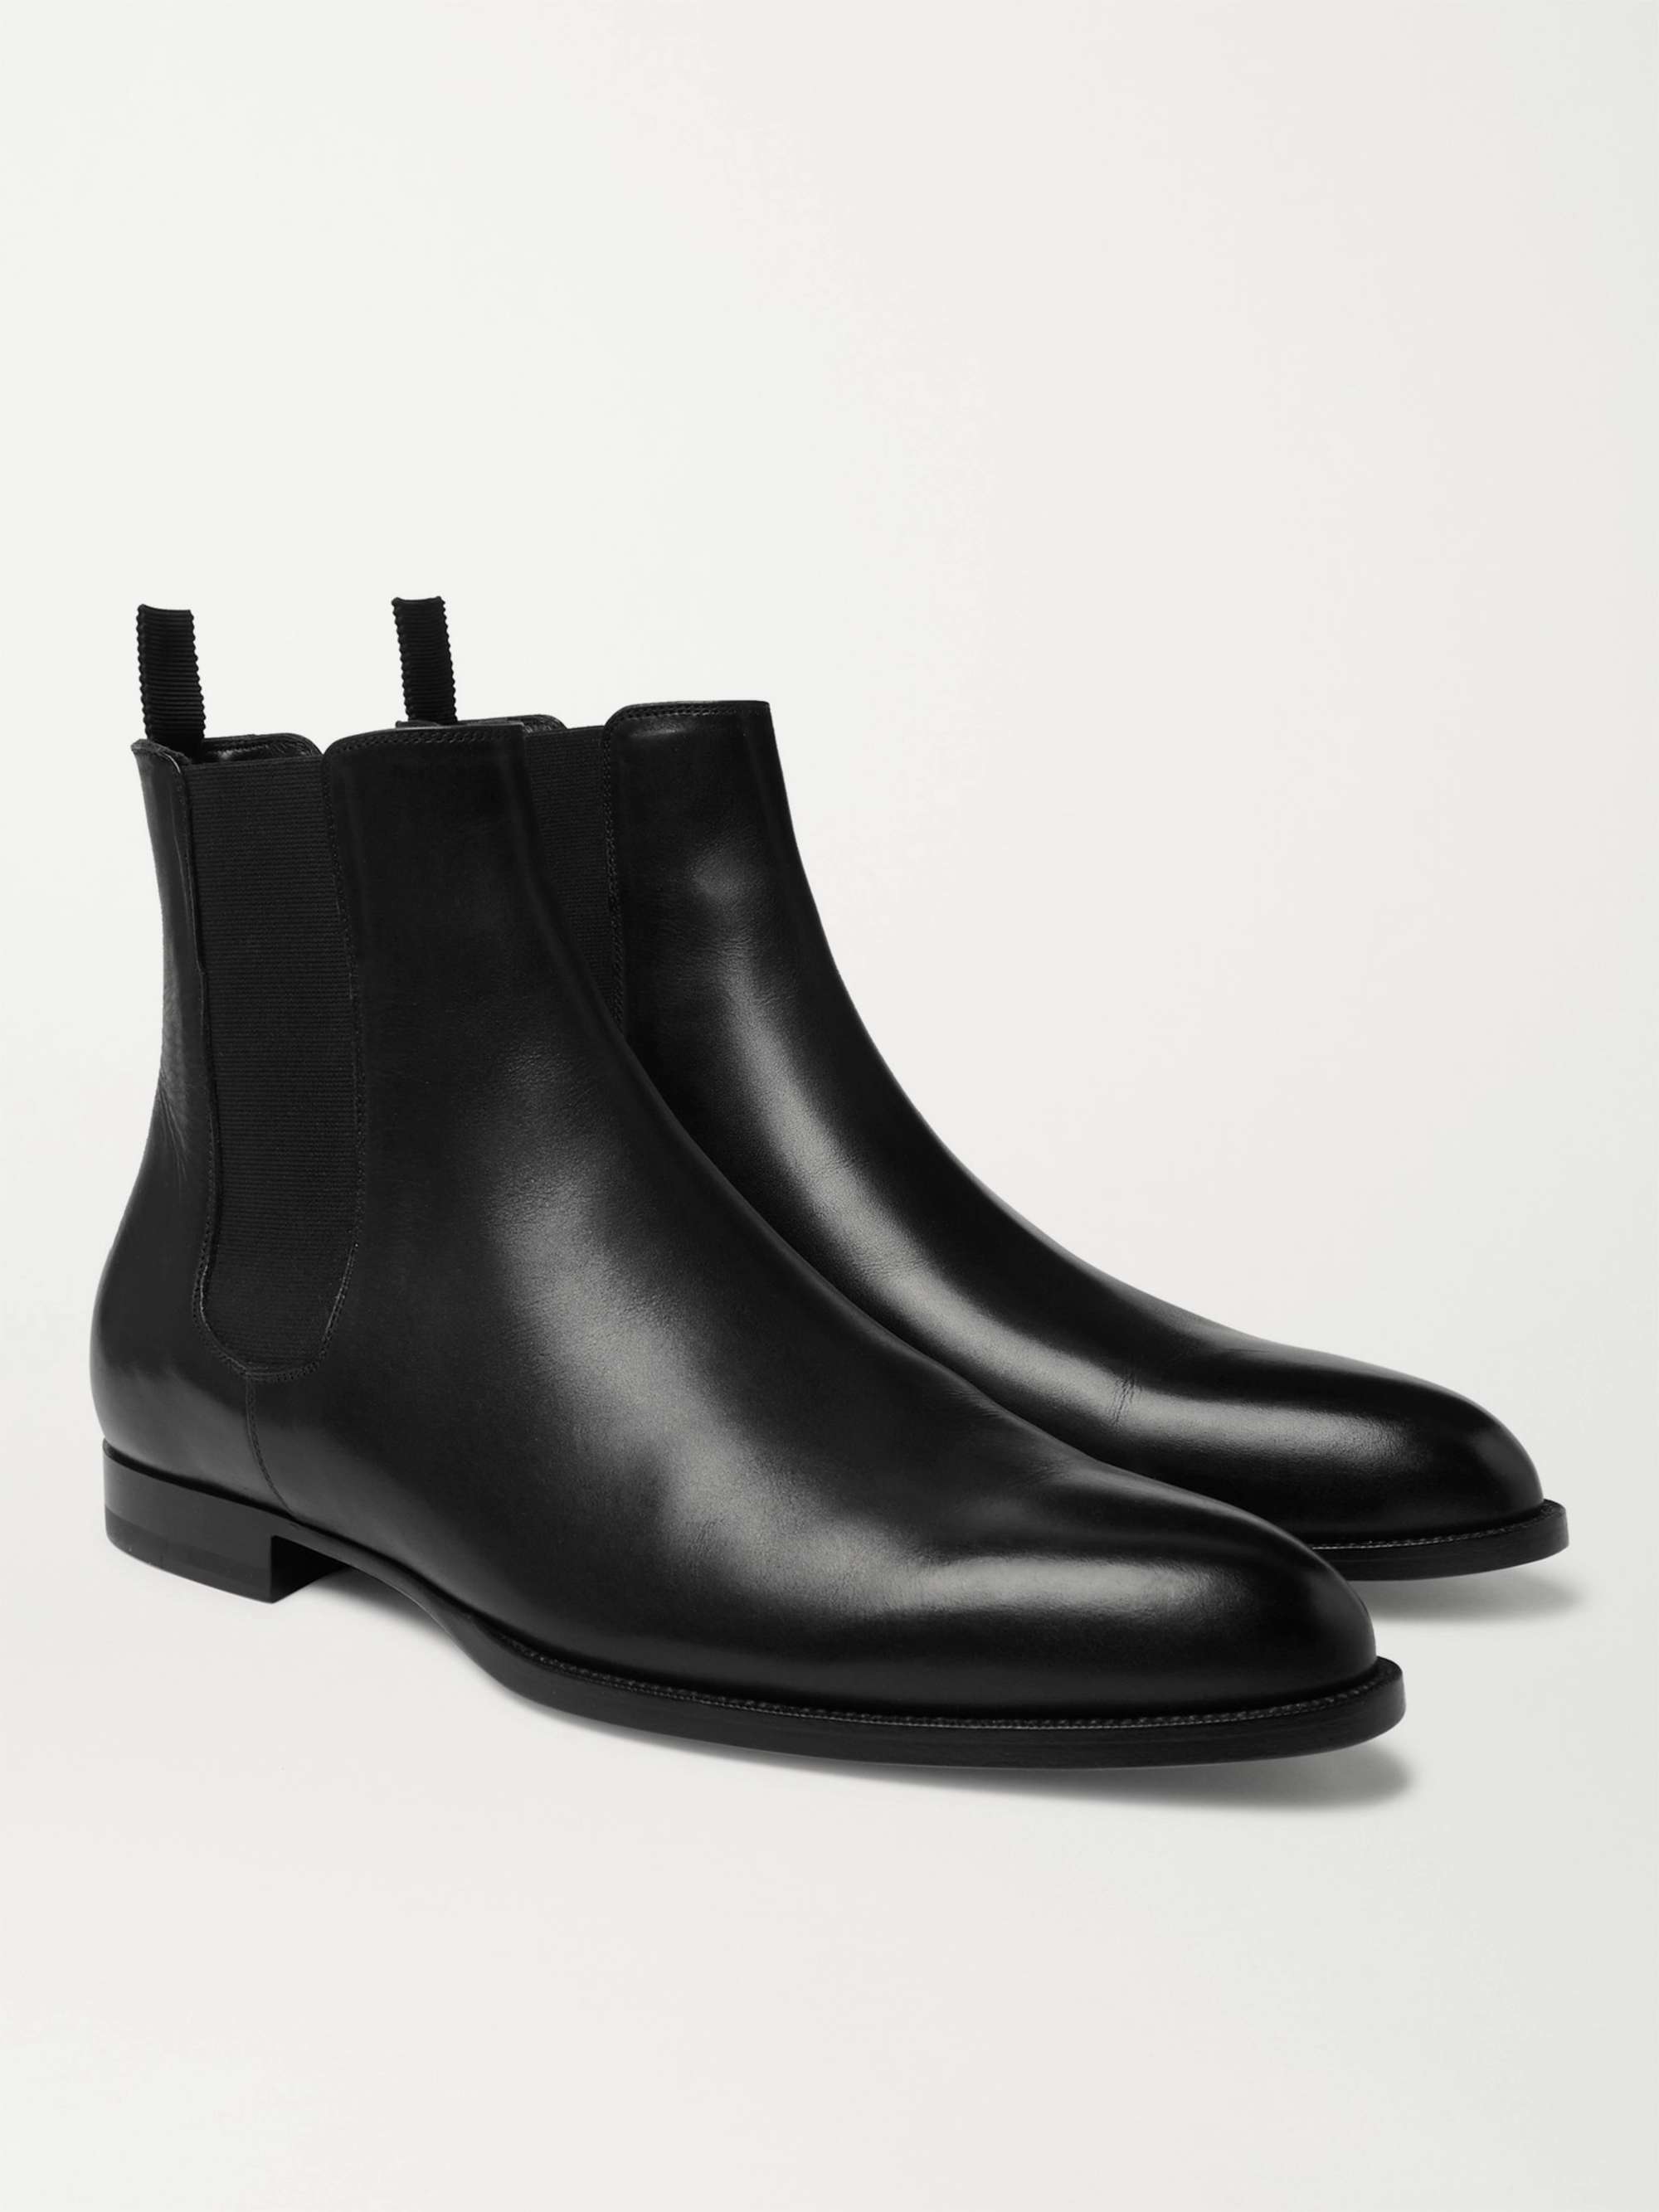 CELINE HOMME Leather Chelsea Boots